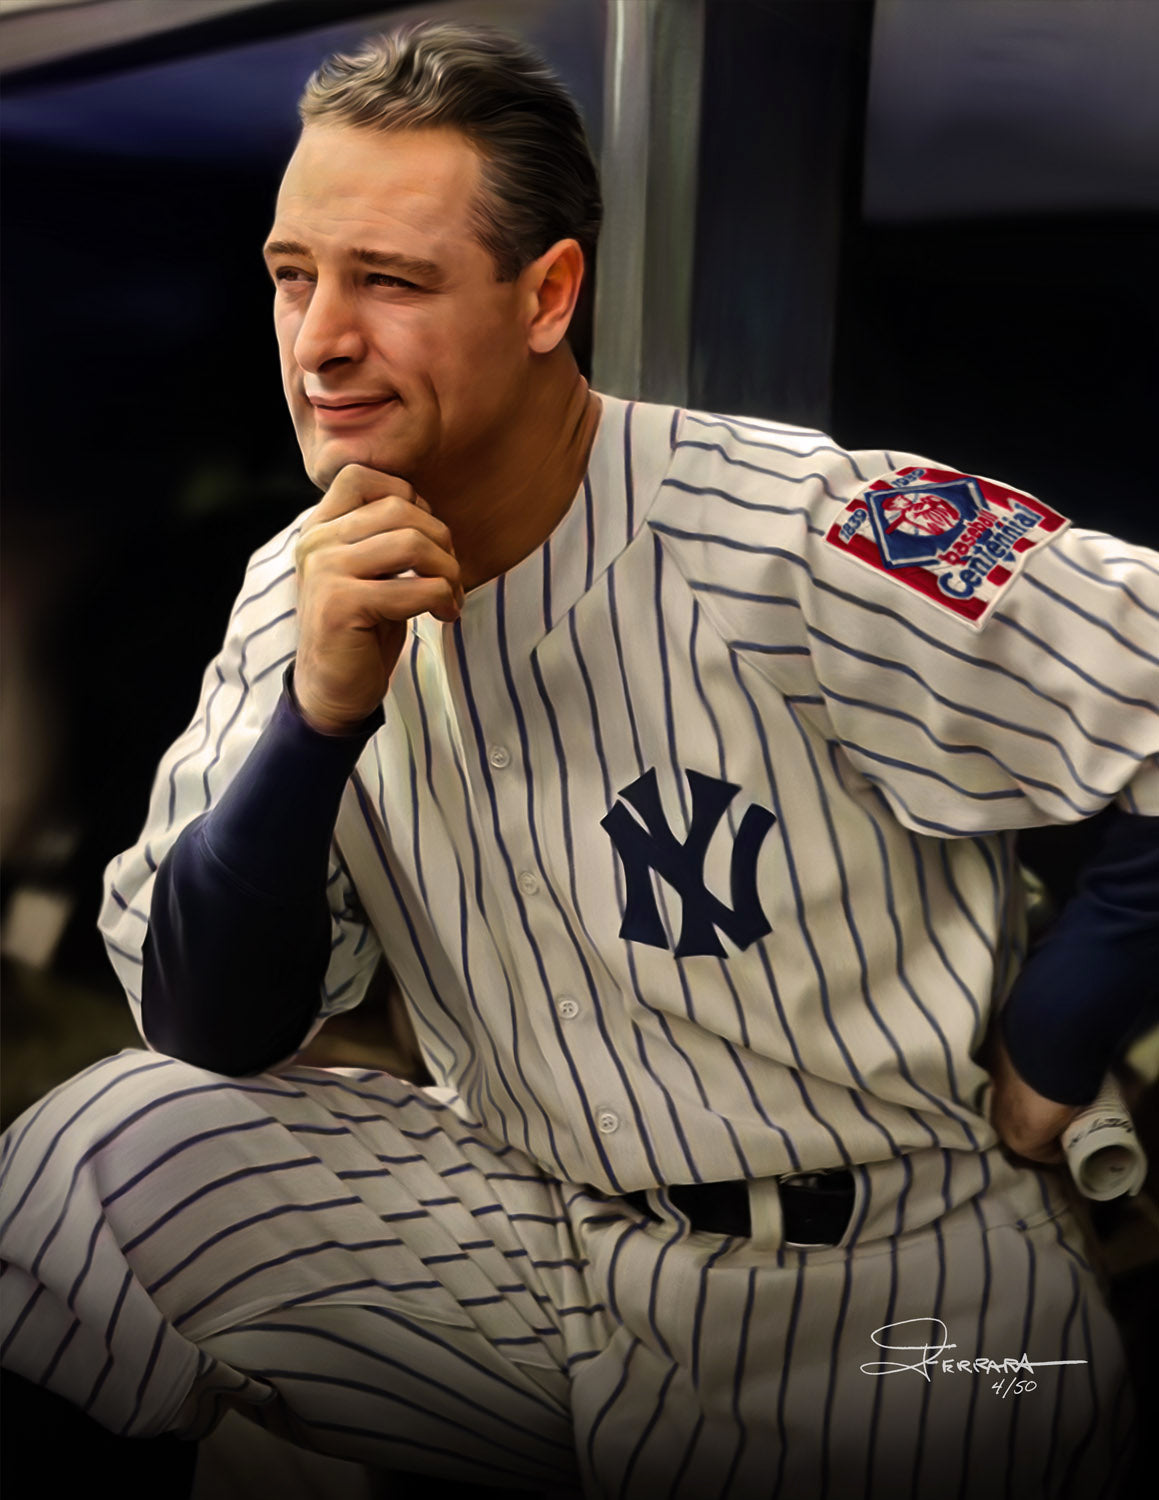 Lou Gehrig (1939), "The Iron Horse"